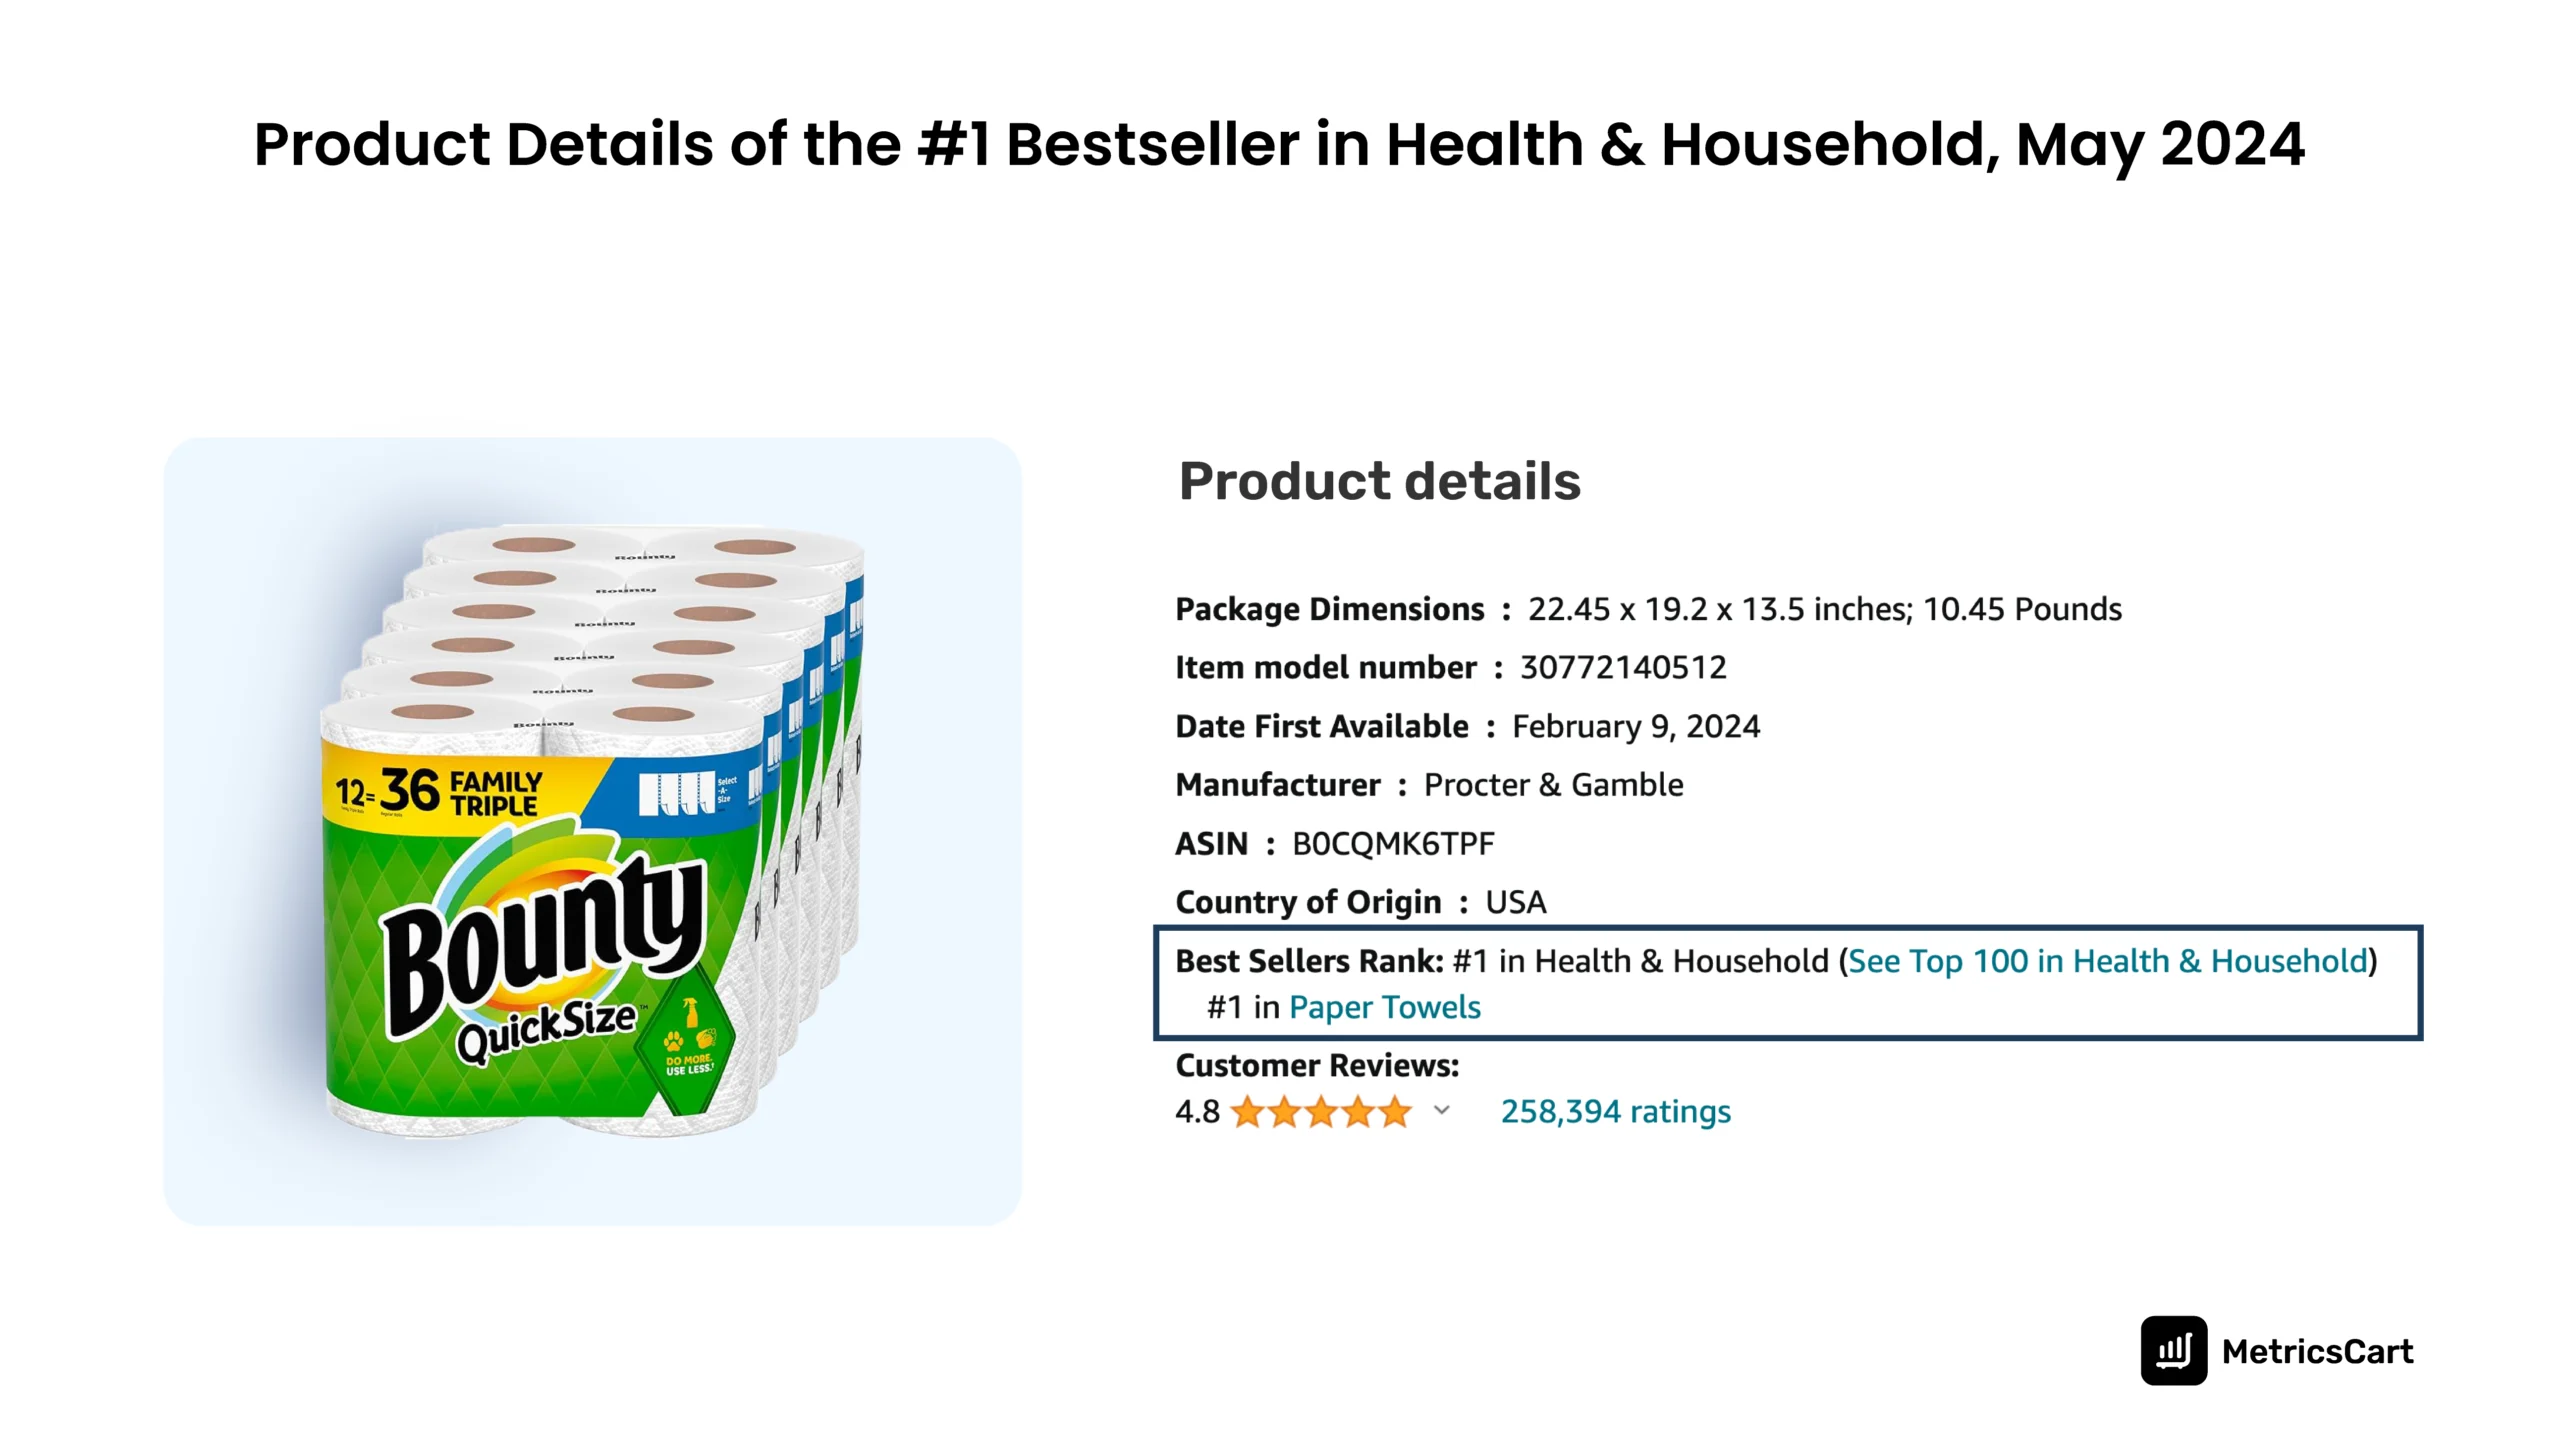 The image shows the product details of May’s #1 bestseller on Amazon in health & household category